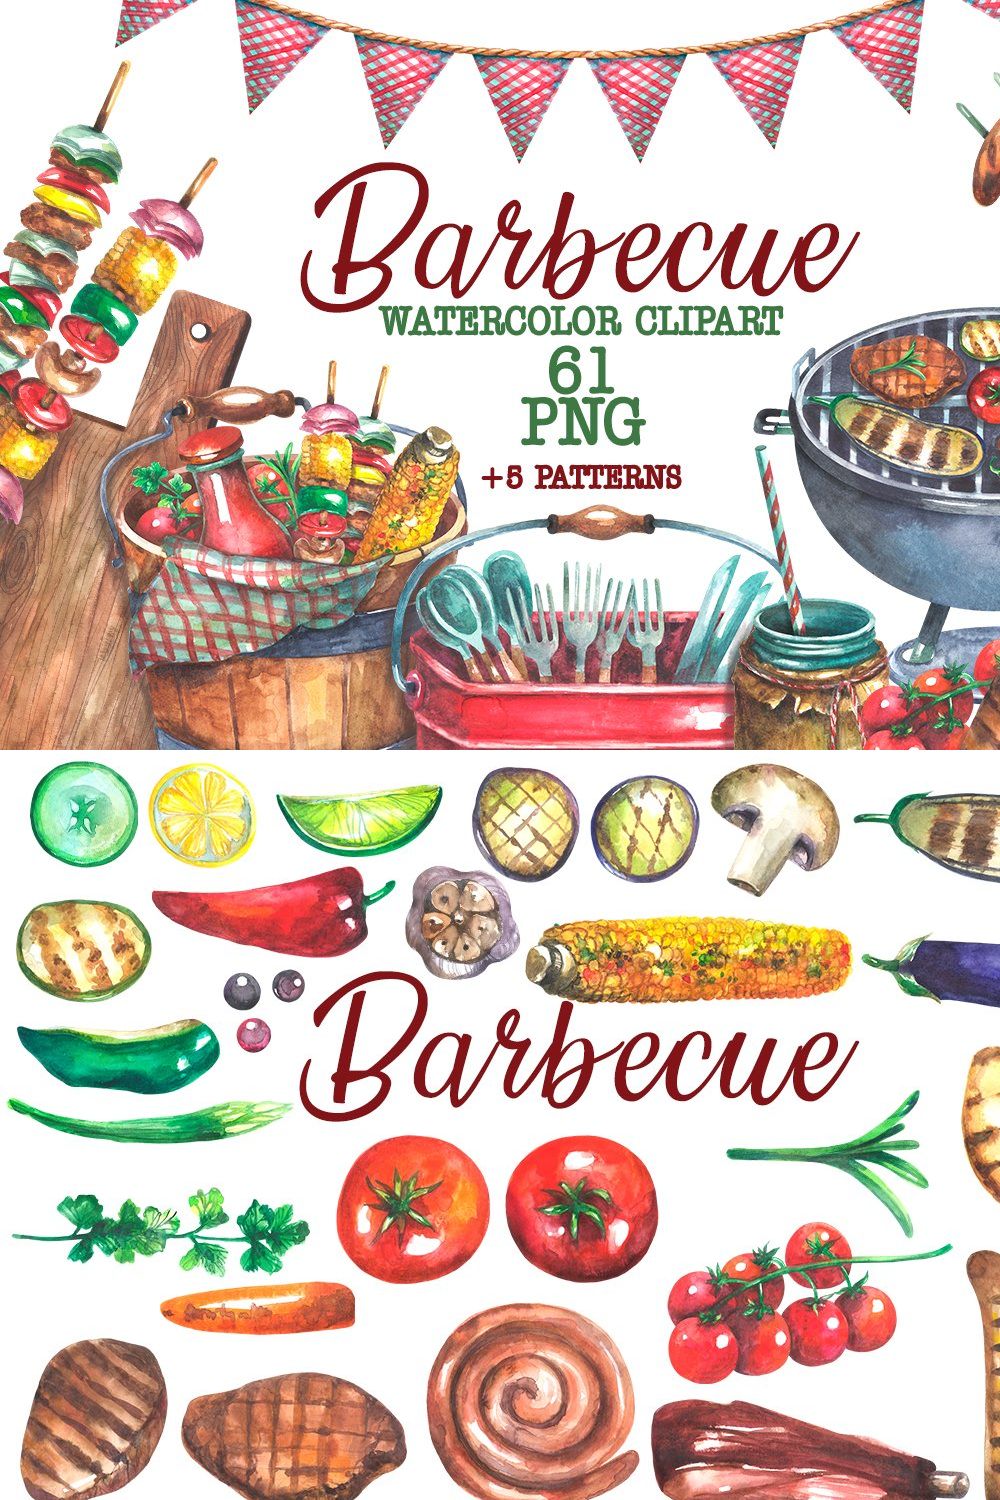 Barbecue Watercolor clipart pinterest preview image.